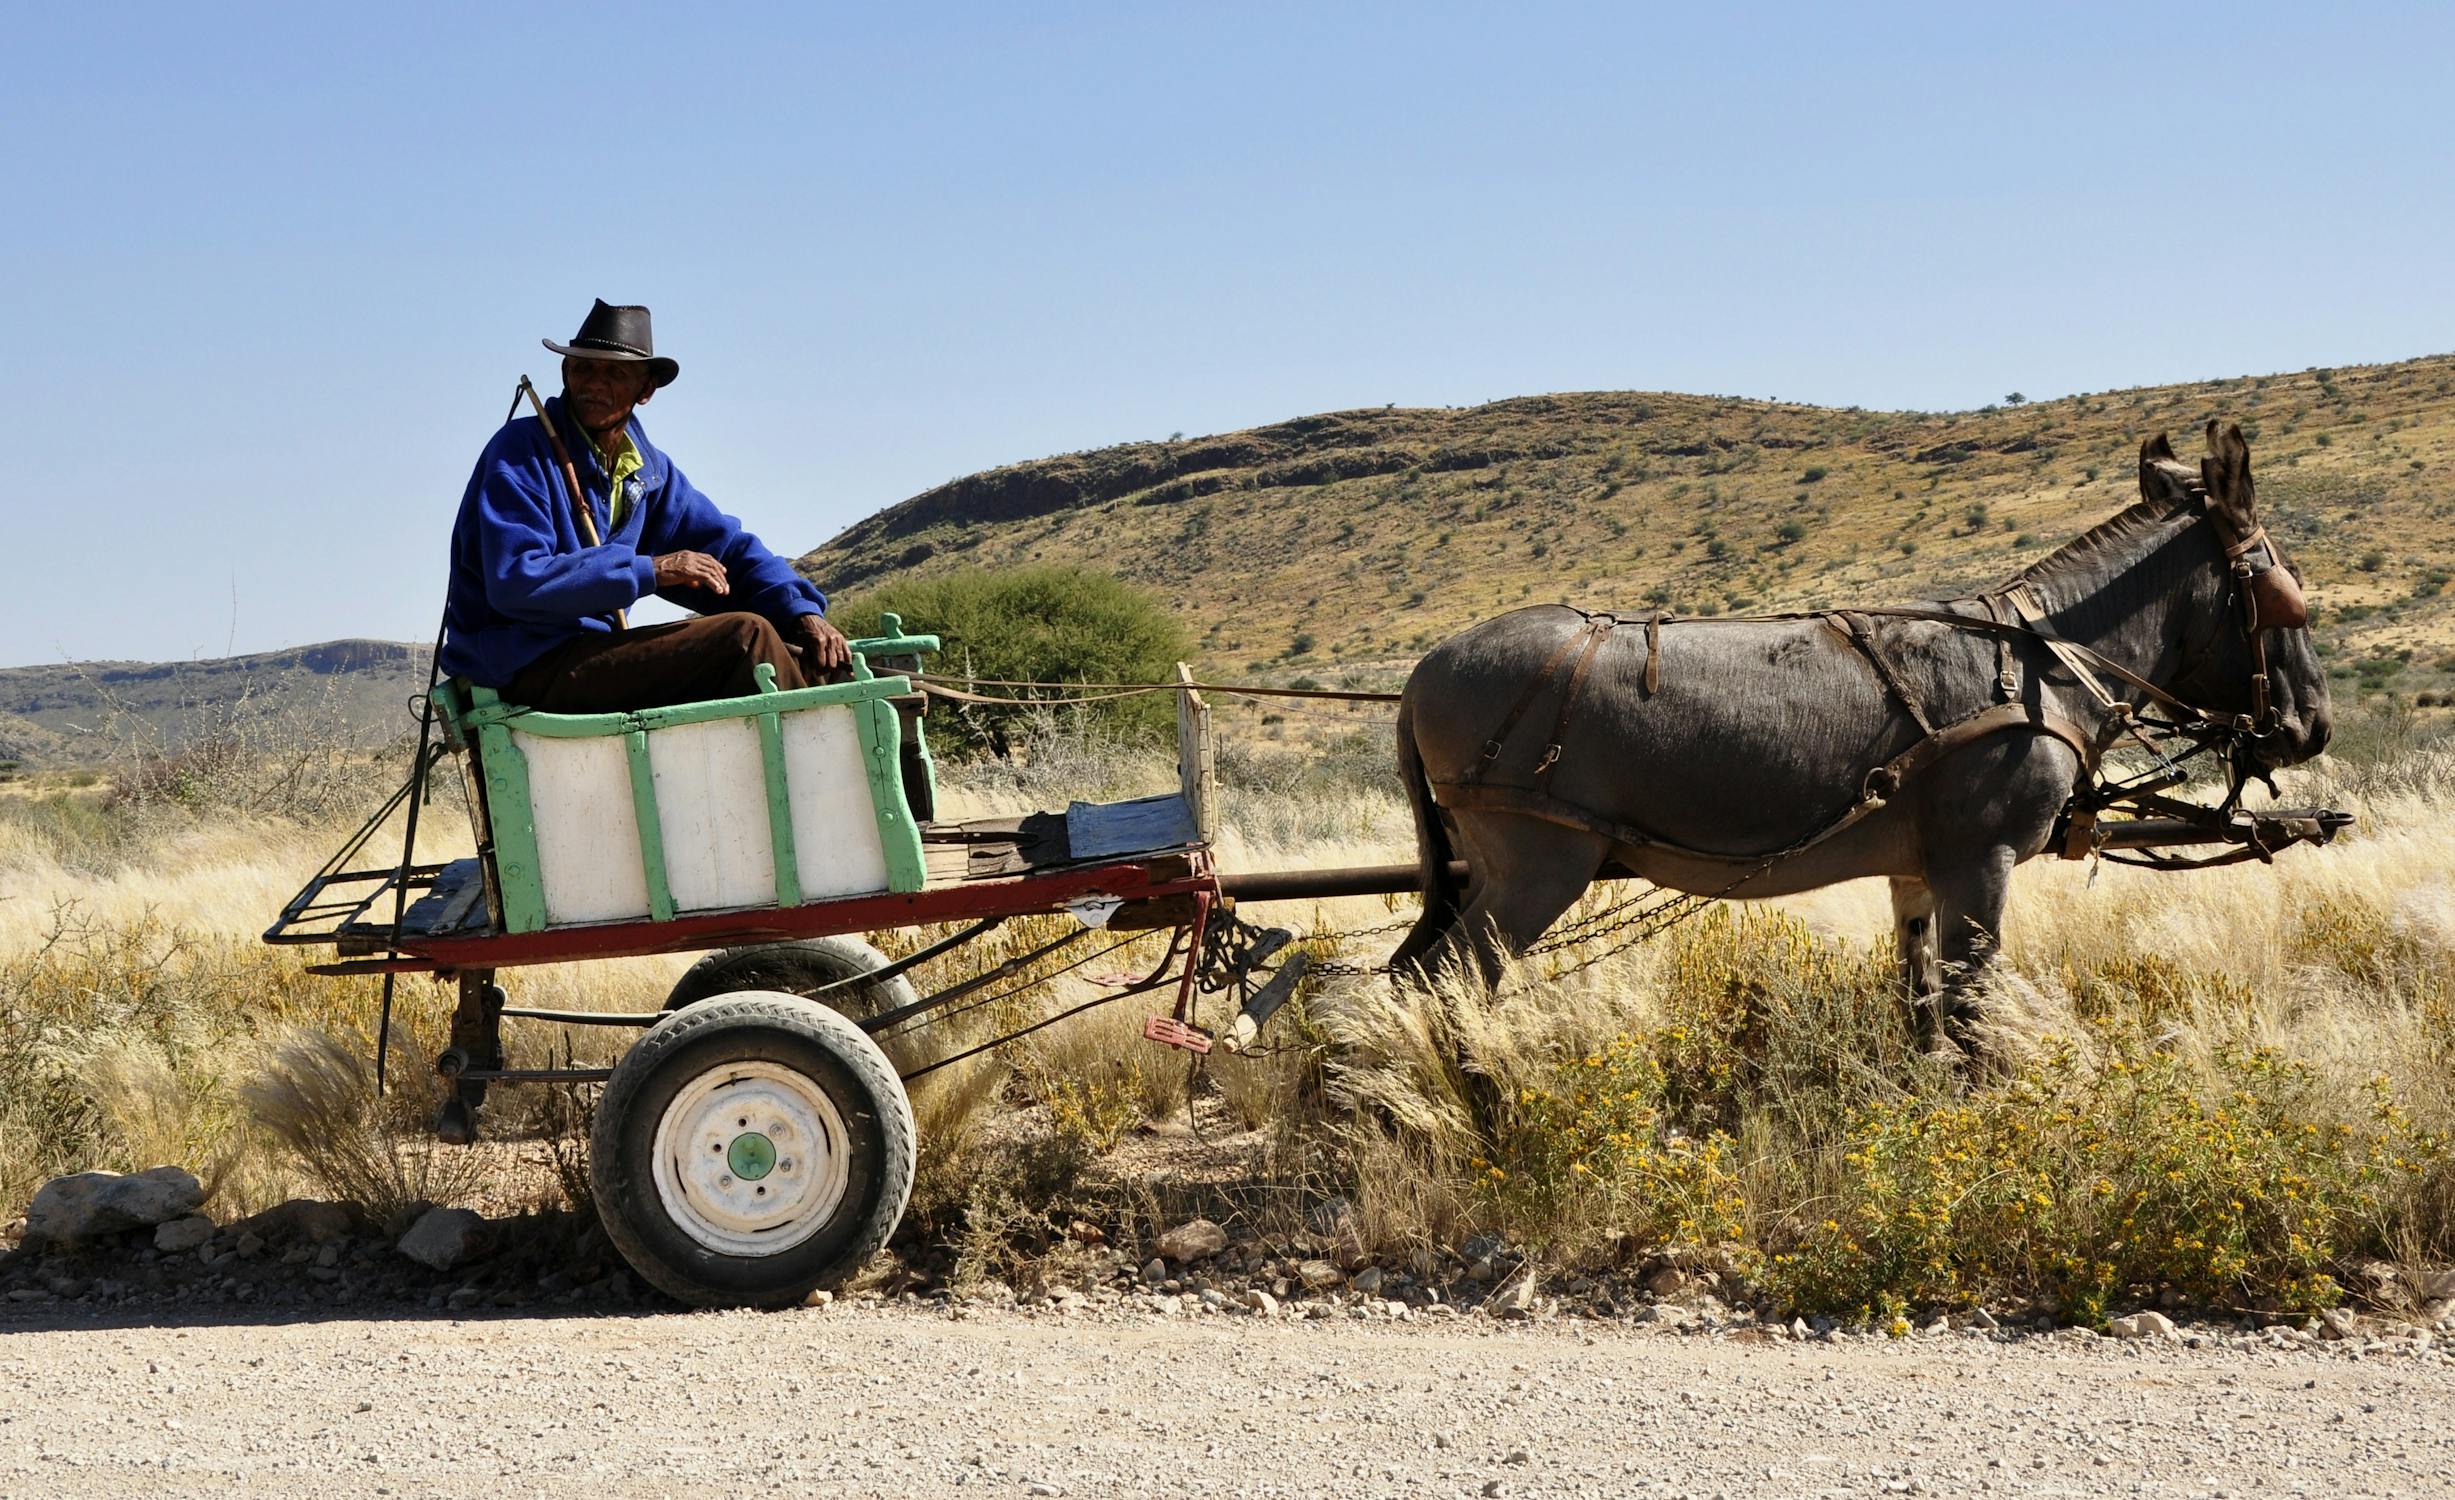 Donkey cart Photo by Pixabay from Pexels: https://www.pexels.com/photo/man-riding-on-carriage-pulled-by-donkey-under-blue-sky-during-daytime-68180/